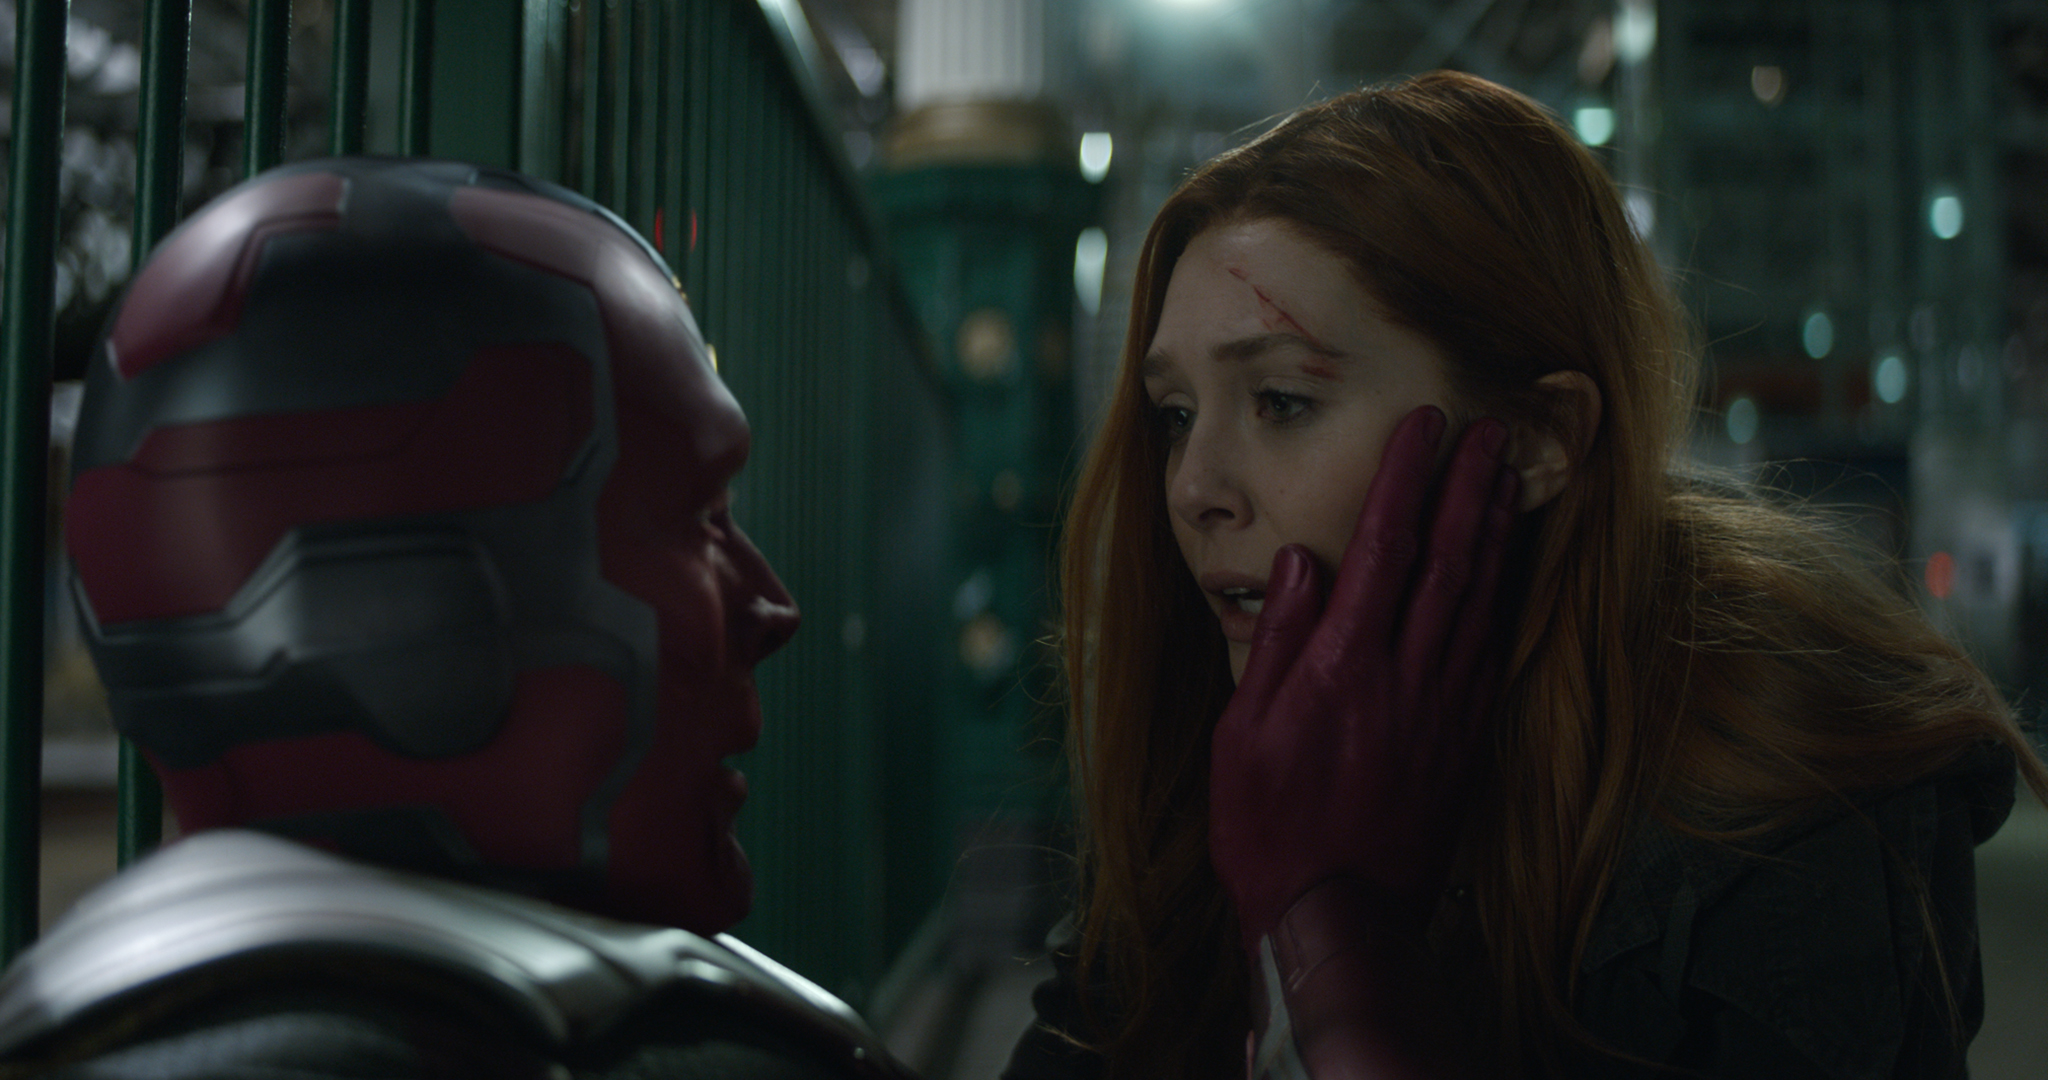 Marvel's Vision and Scarlet Witch Show Officially Titled